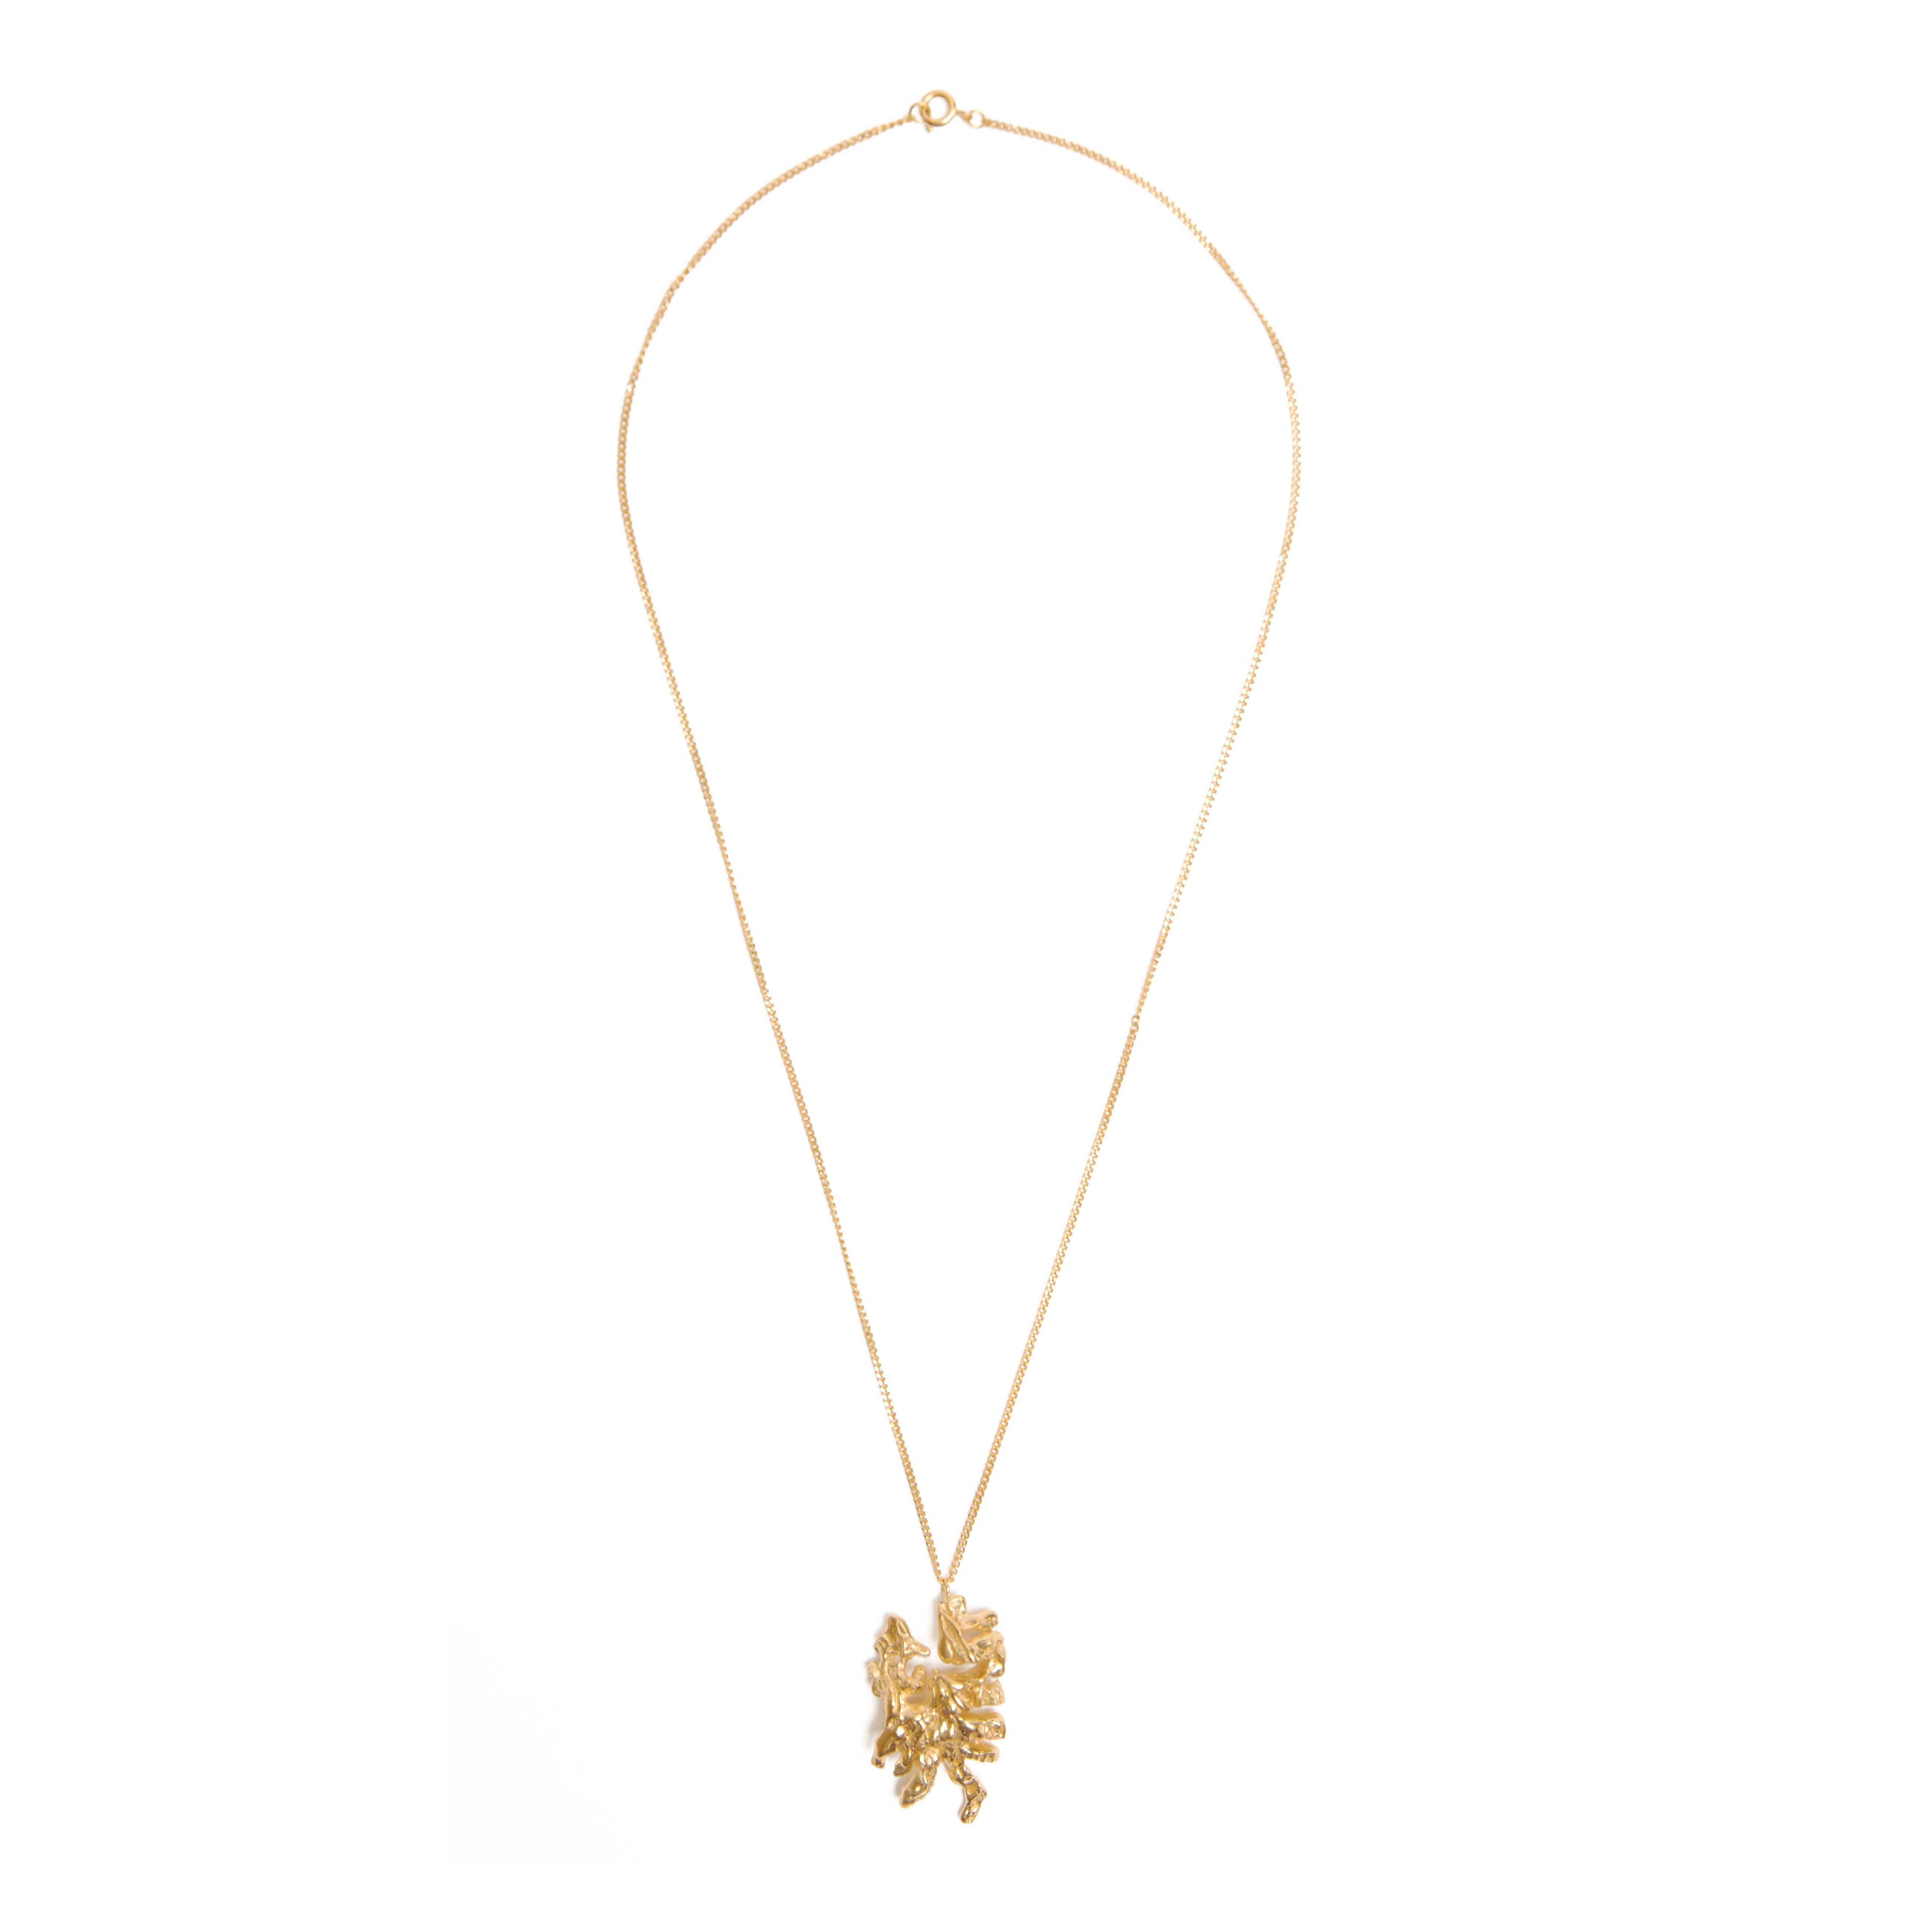 The Chinese zodiac Dragon necklace is inspired by the ancient Chinese calligraphy character of Dragon (Long 龍), the fifth of the twelve signs of the Chinese zodiac. The Dragon is the only imaginary or fantastical animal in the zodiac, and – perhaps